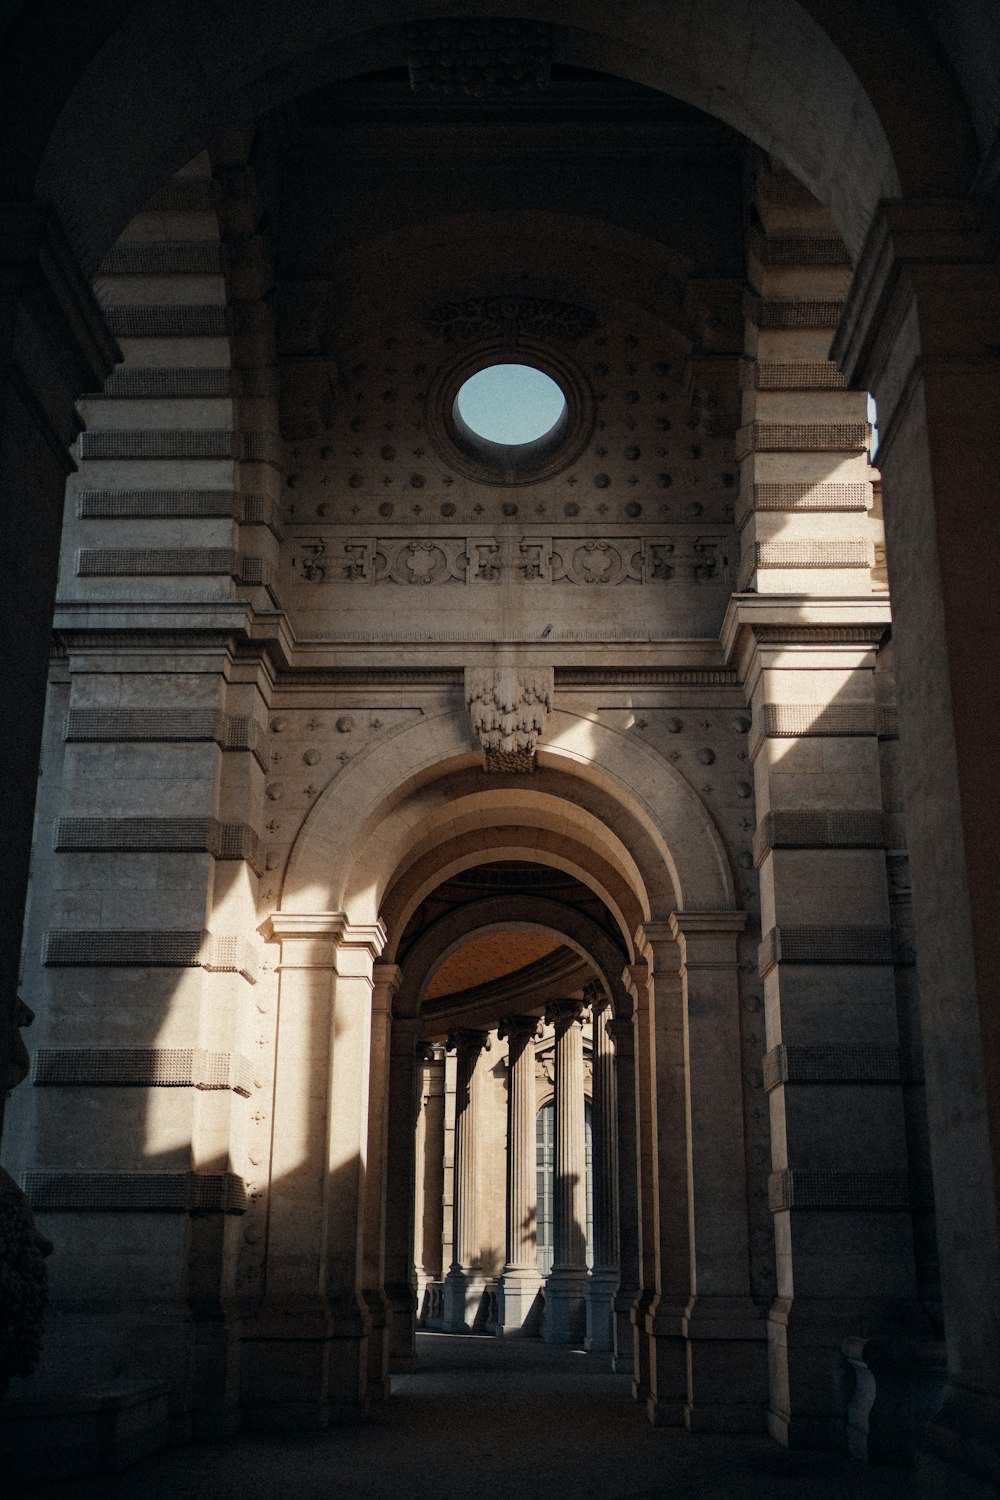 an archway with a circular window in the middle of it